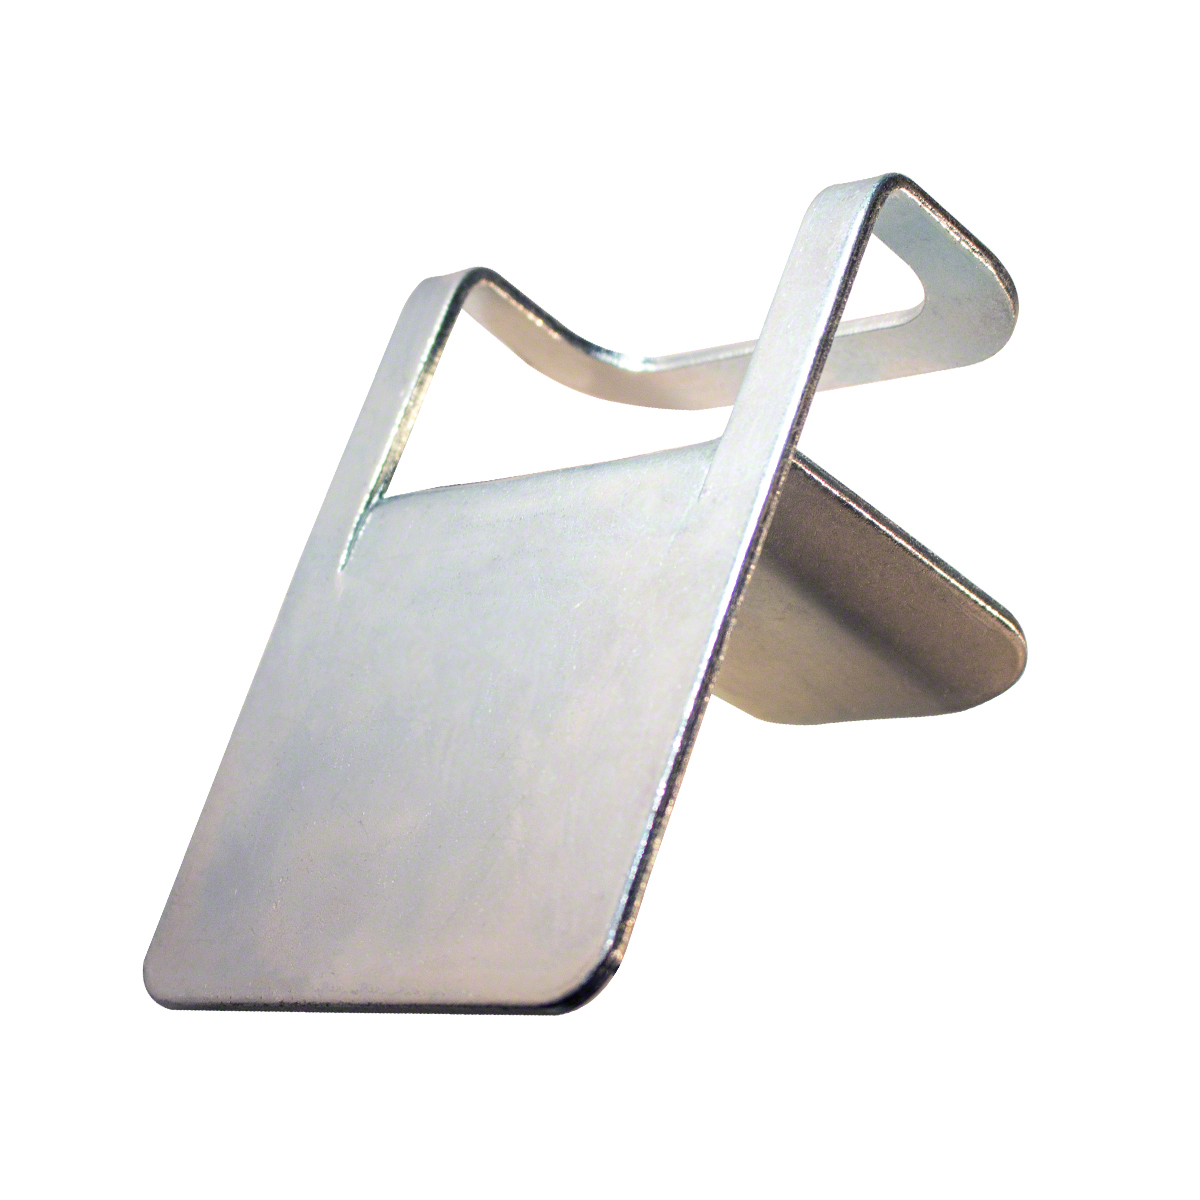 Steel Edge Protector with Rubber Backing for Chain